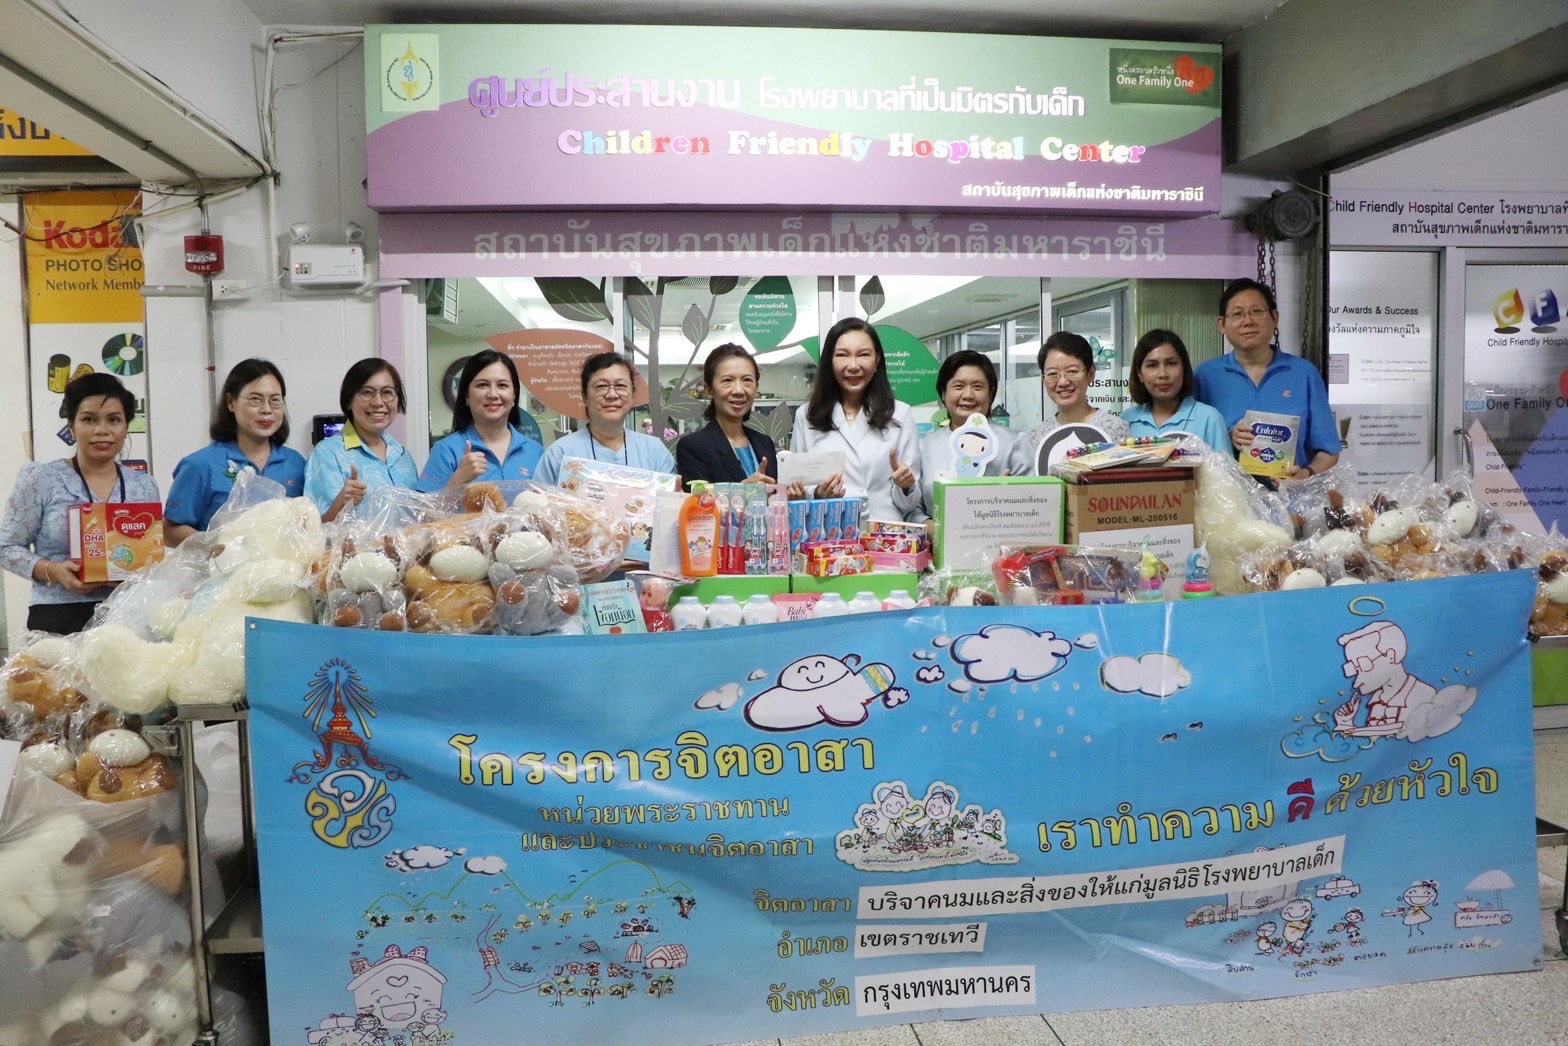 OIE Participates in Donating Milk and Goods to the Children's Hospital Foundation on Her Majesty Queen Sirikit’s Birthday on August 12